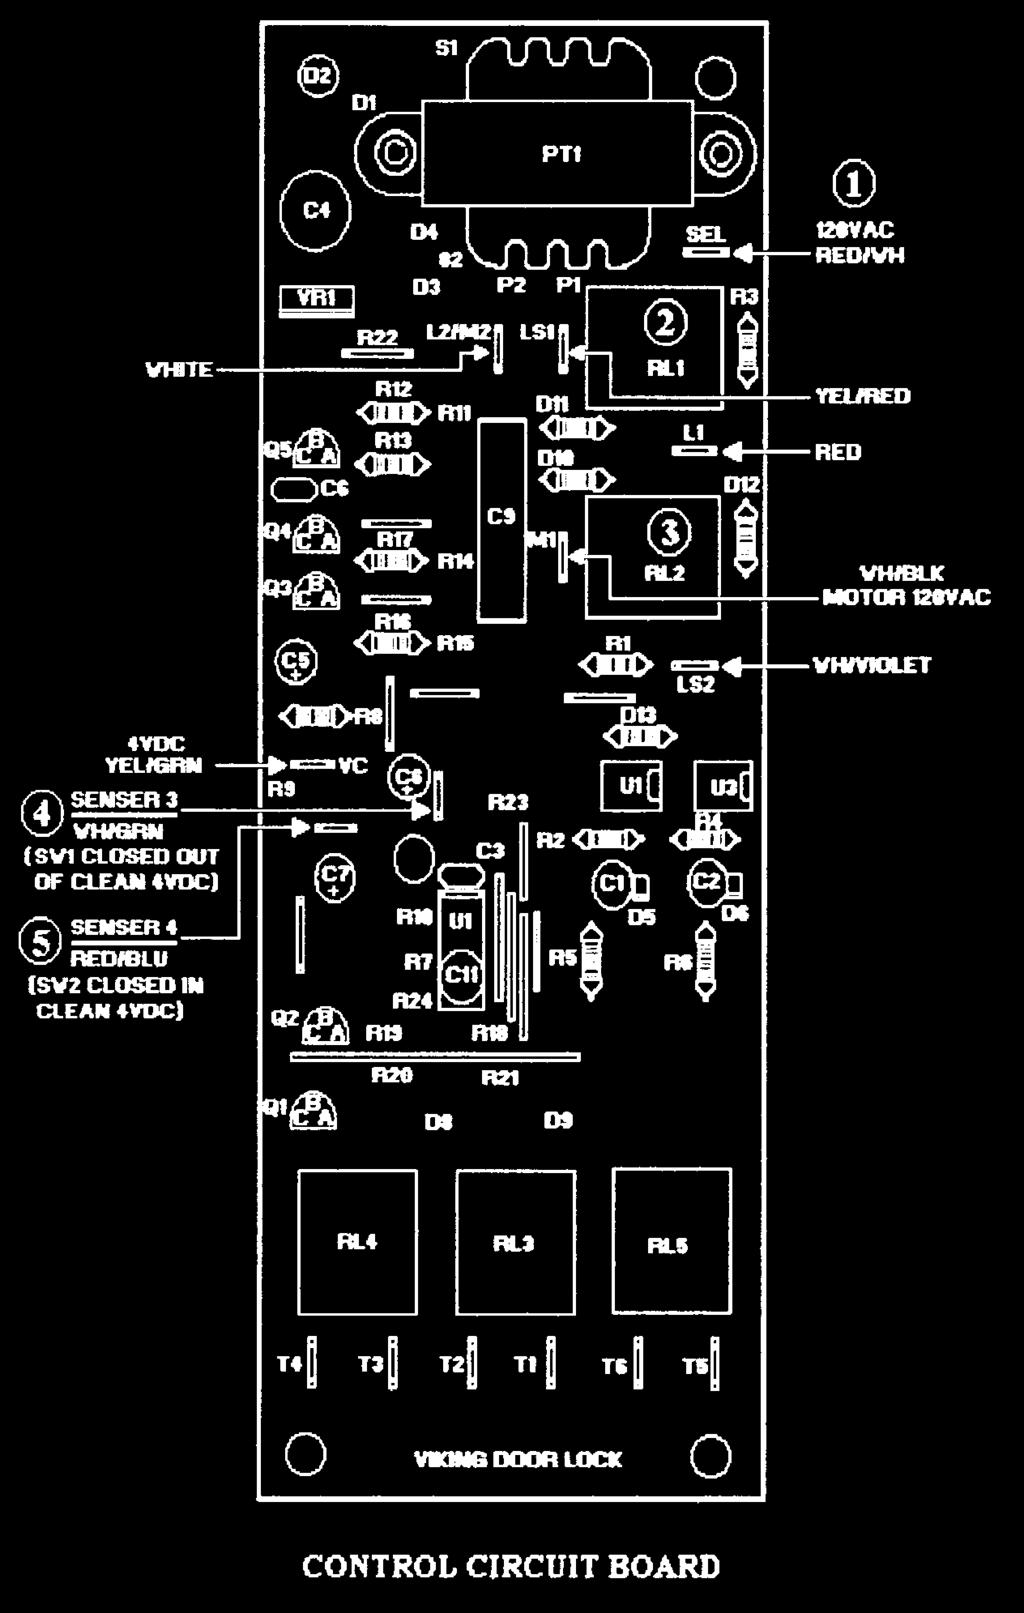 PRINTED CIRCUIT BOARD WIRING FOR